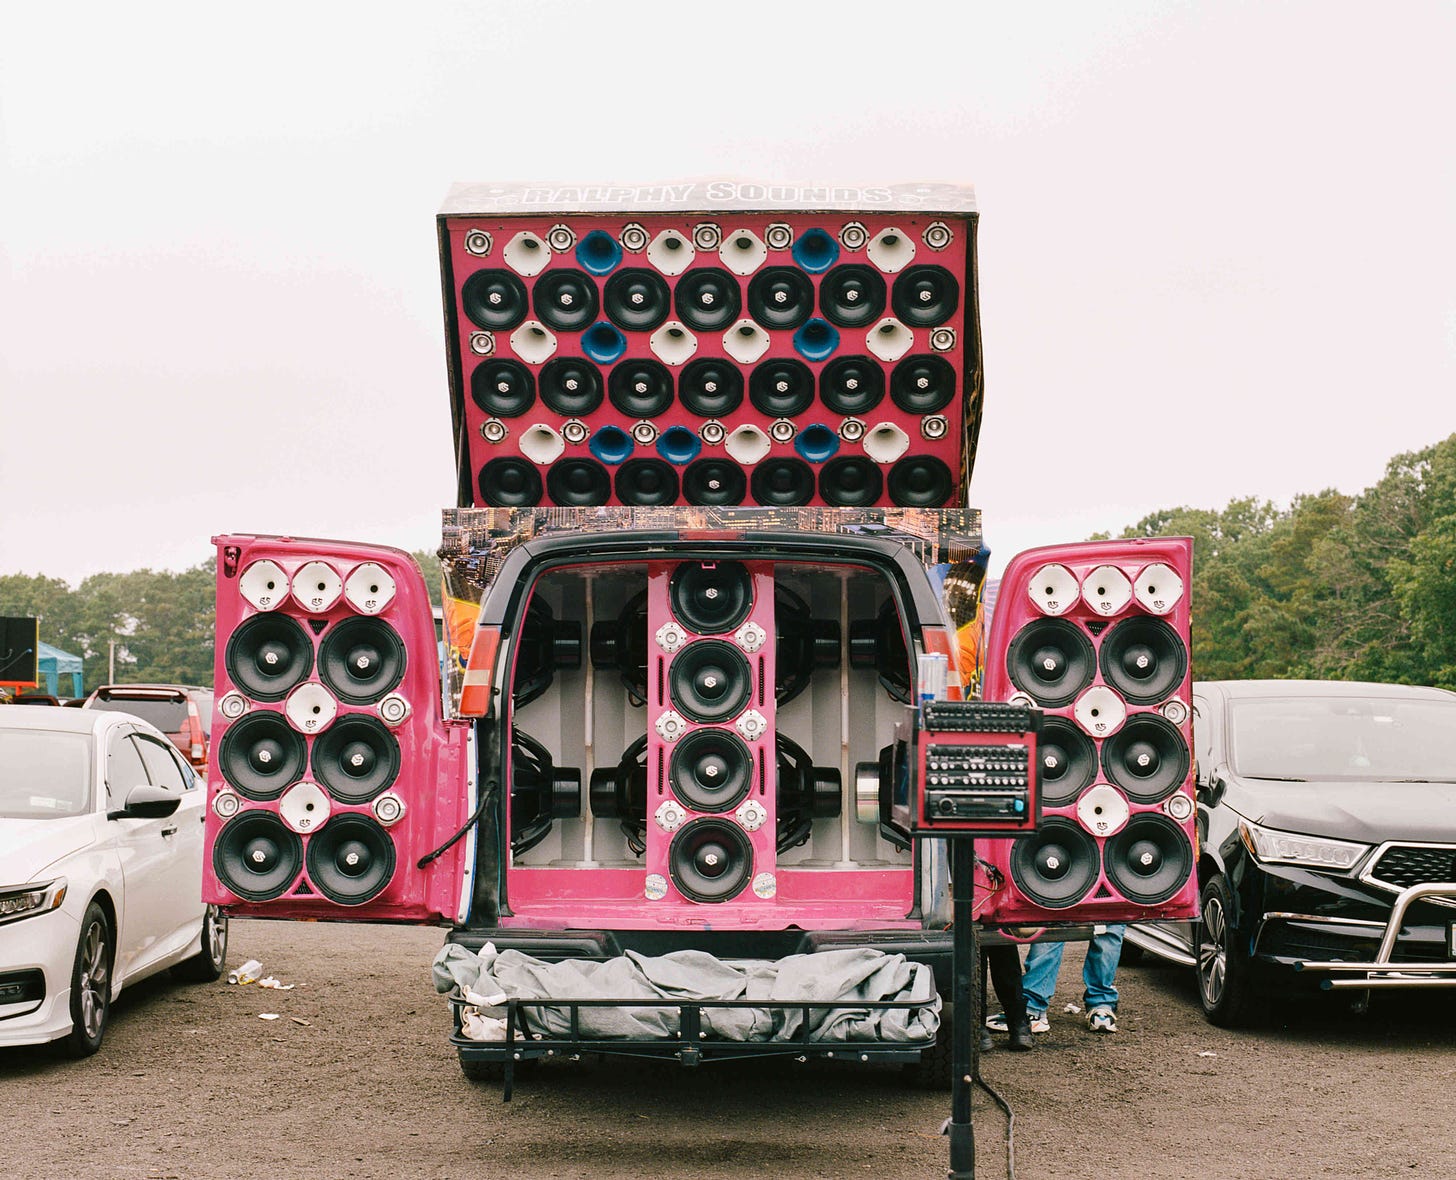 Image: The back doors of a van are open, revealing an elaborate custom bubble gum pink sound system. There are even more speakers mounted on top of the van.